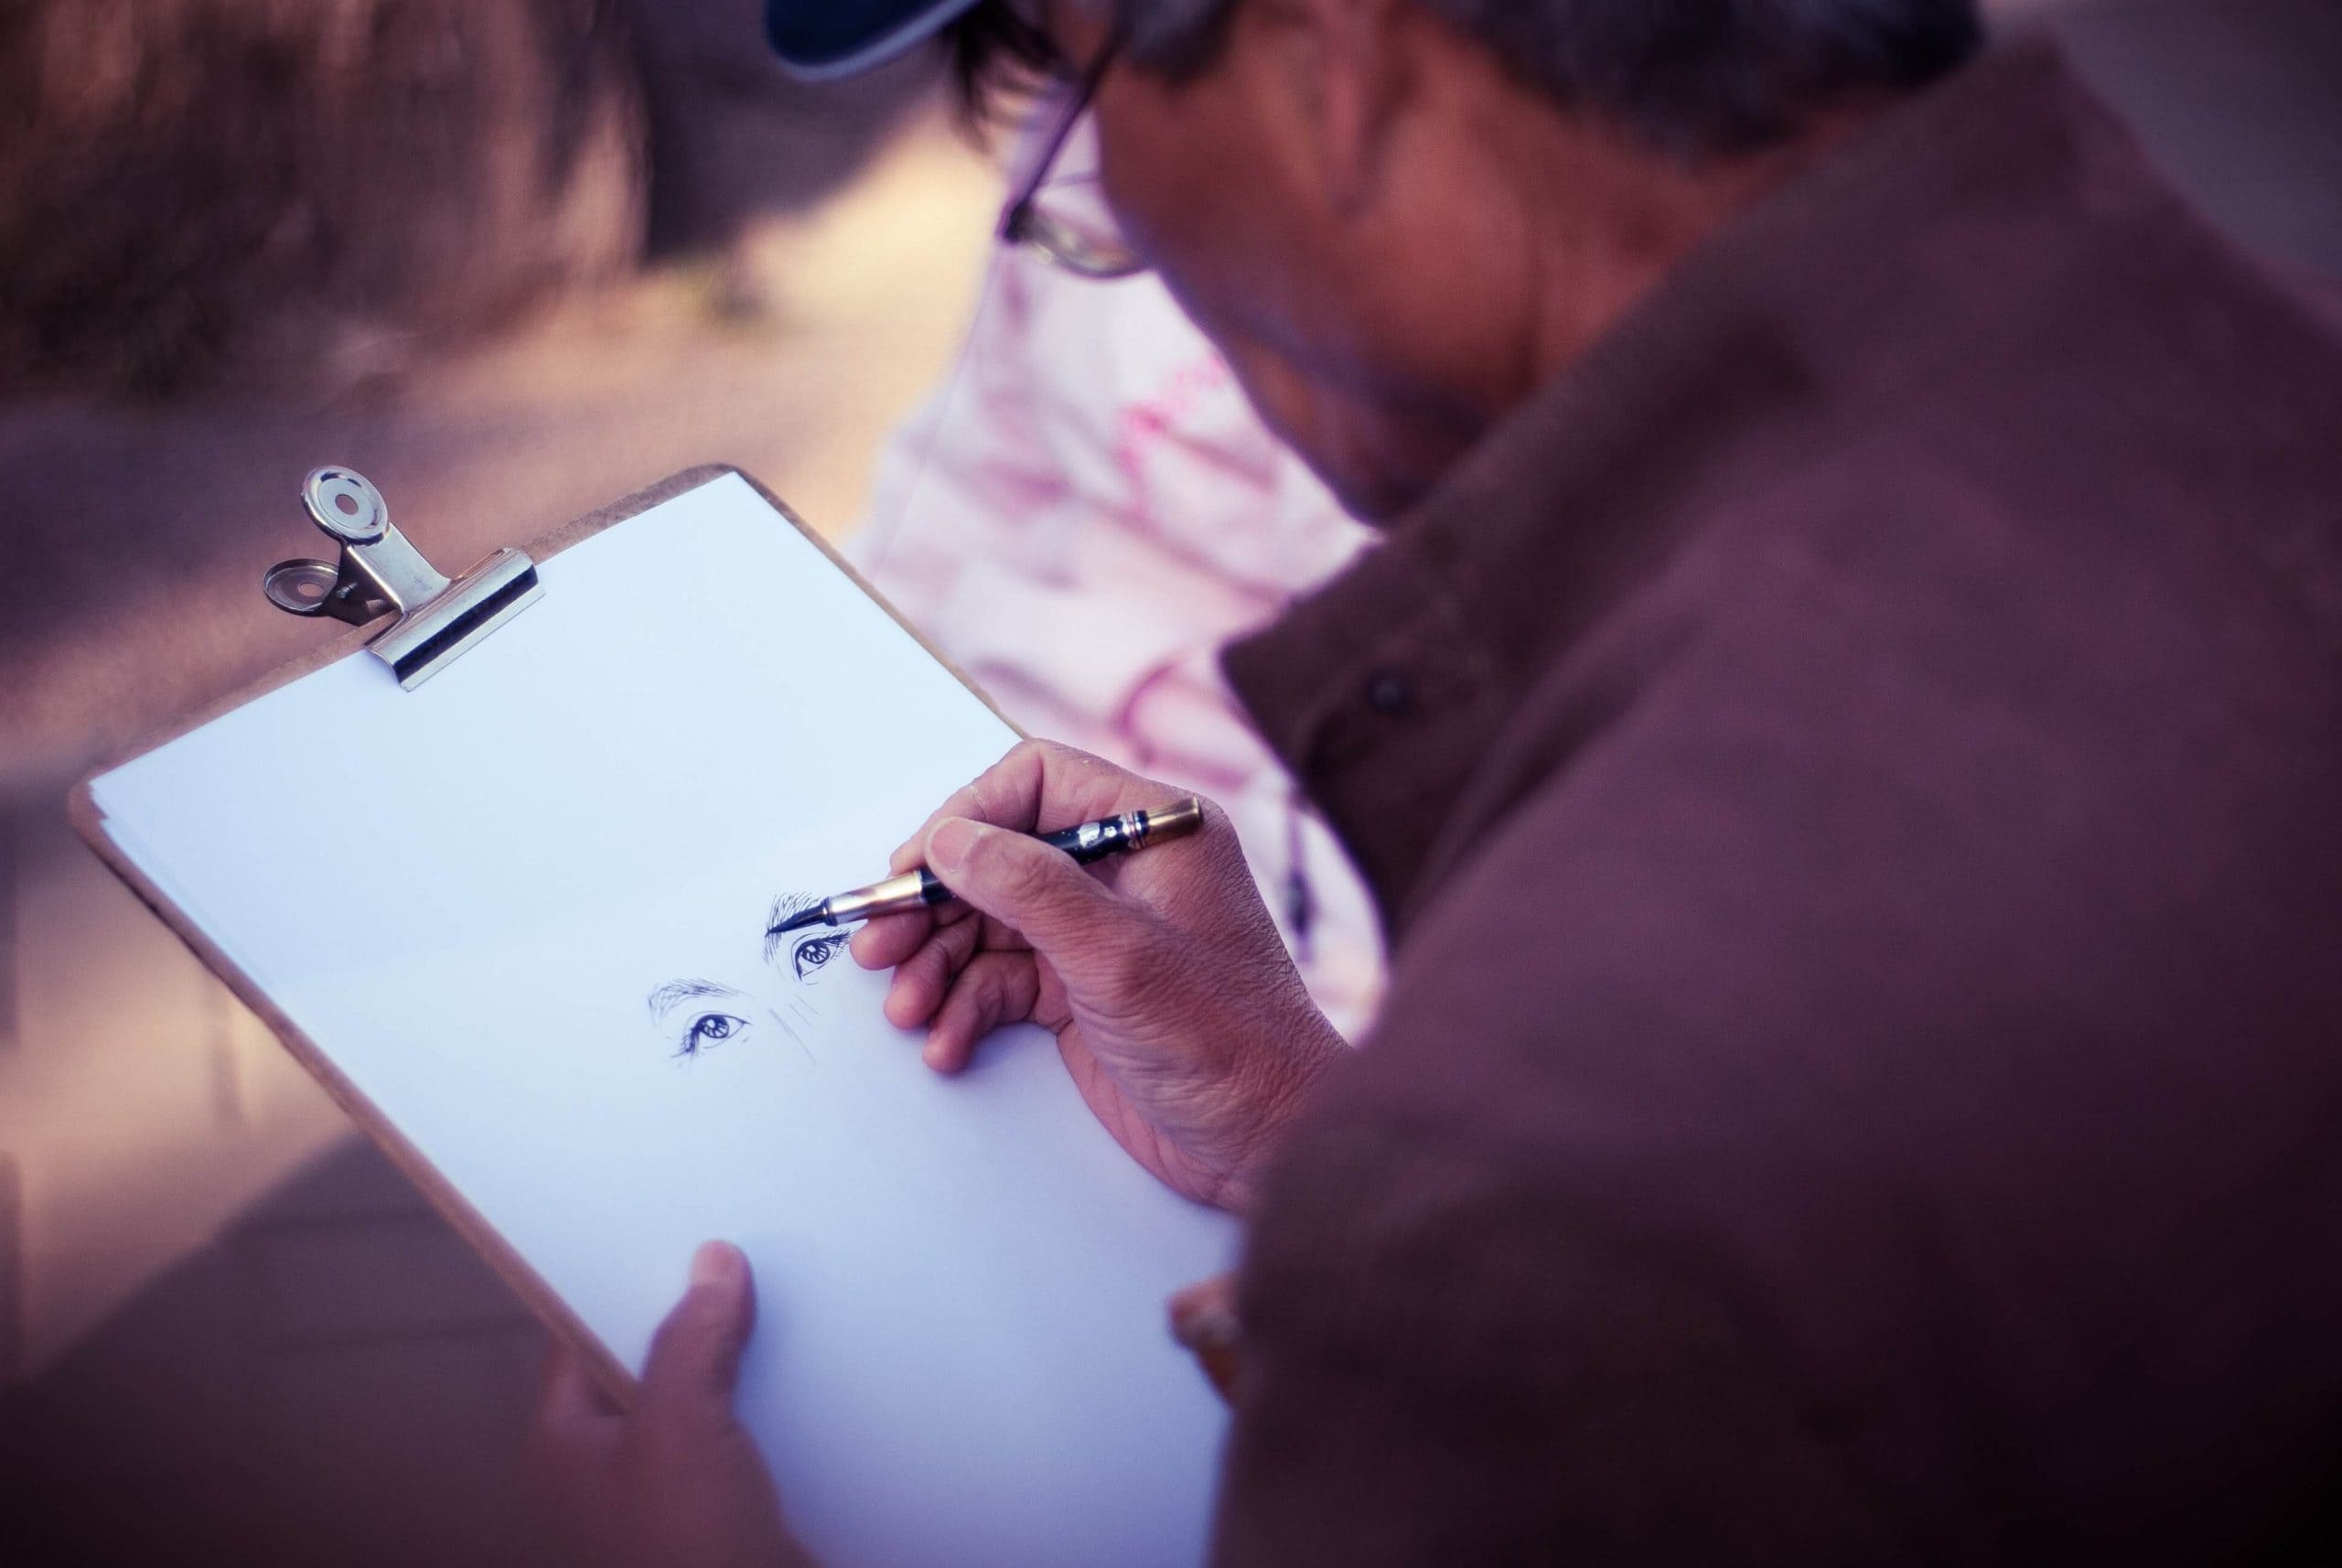 Want to draw a portrait? Read our tips